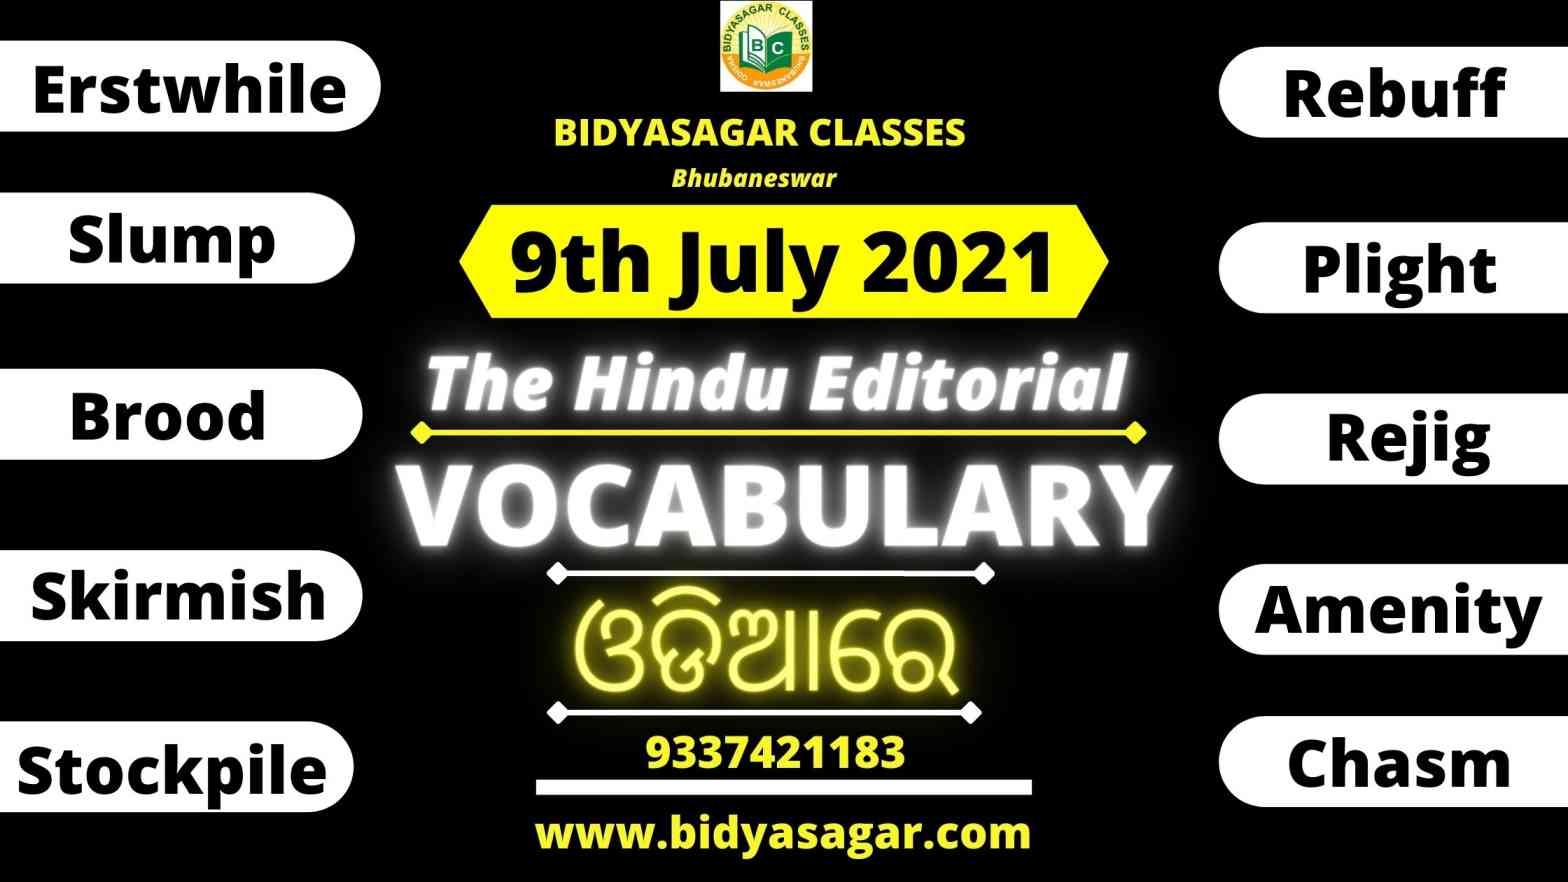 The Hindu Editorial Vocabulary of 9th July 2021